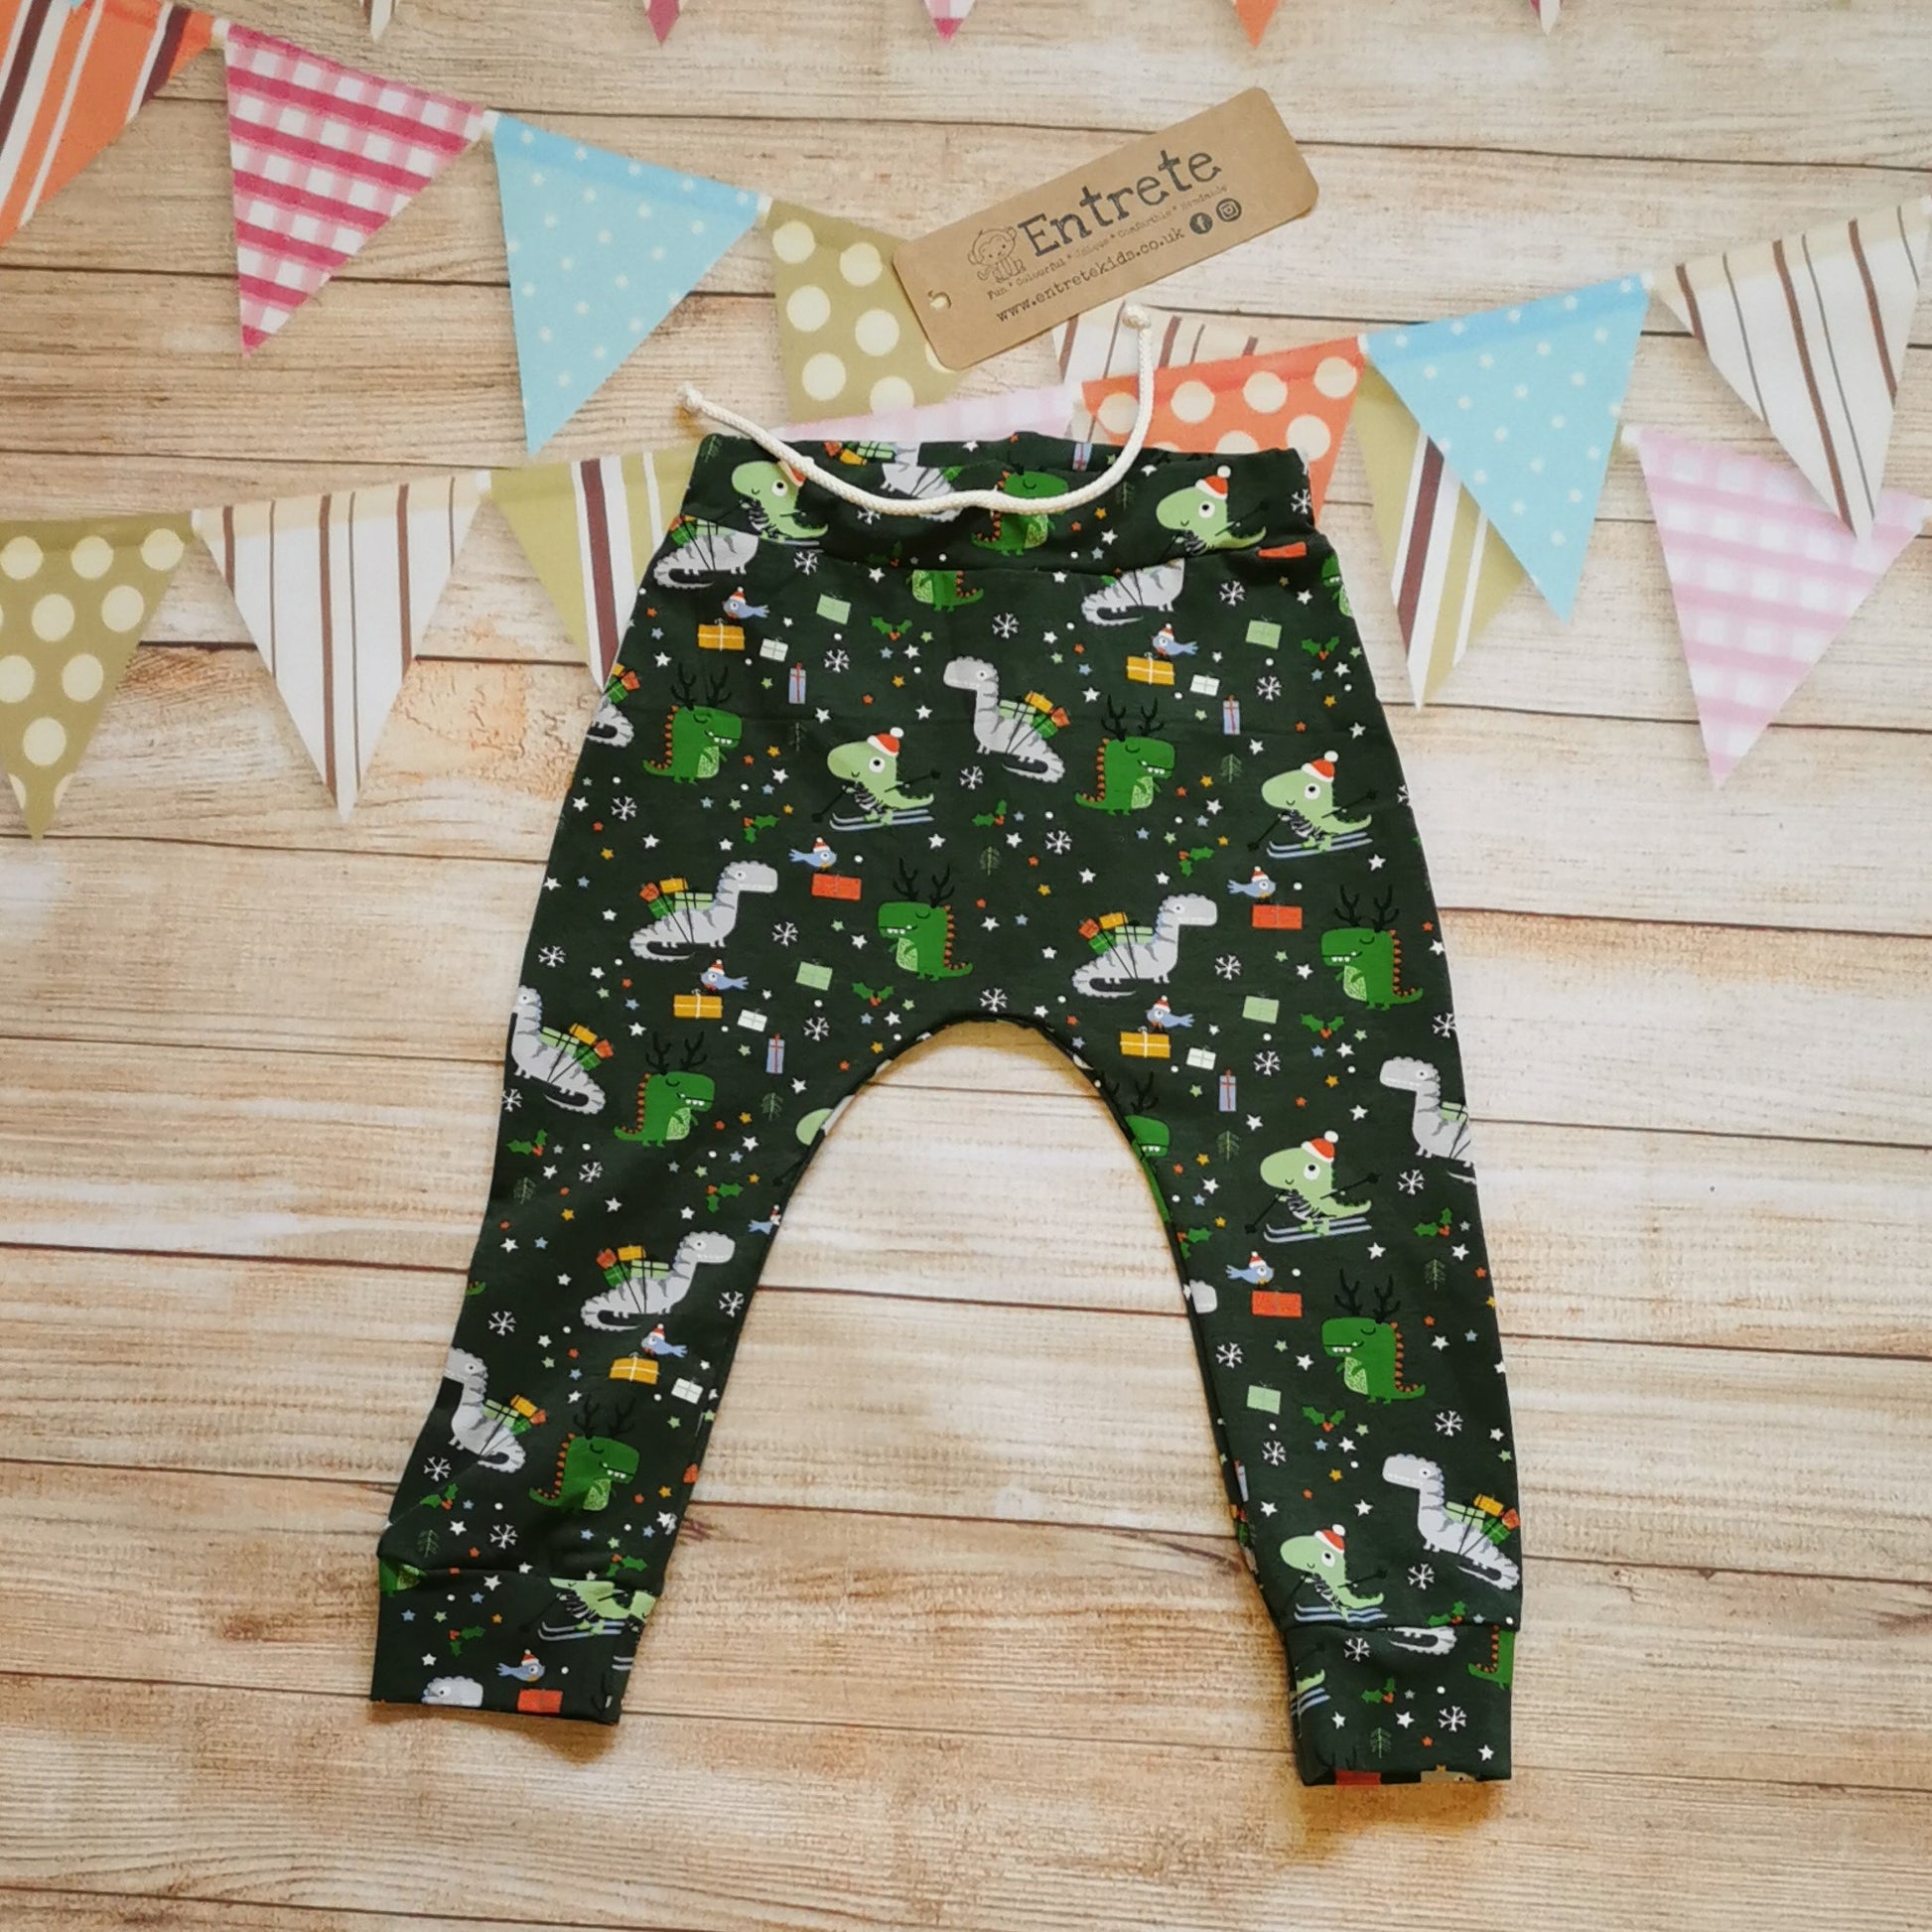 Harem joggers with elasticated waist, dropped crotch and roll-able ankle cuffs. Handmade in dark green festasaurus cotton jersey. Perfect for your little dinosaur fanatic!